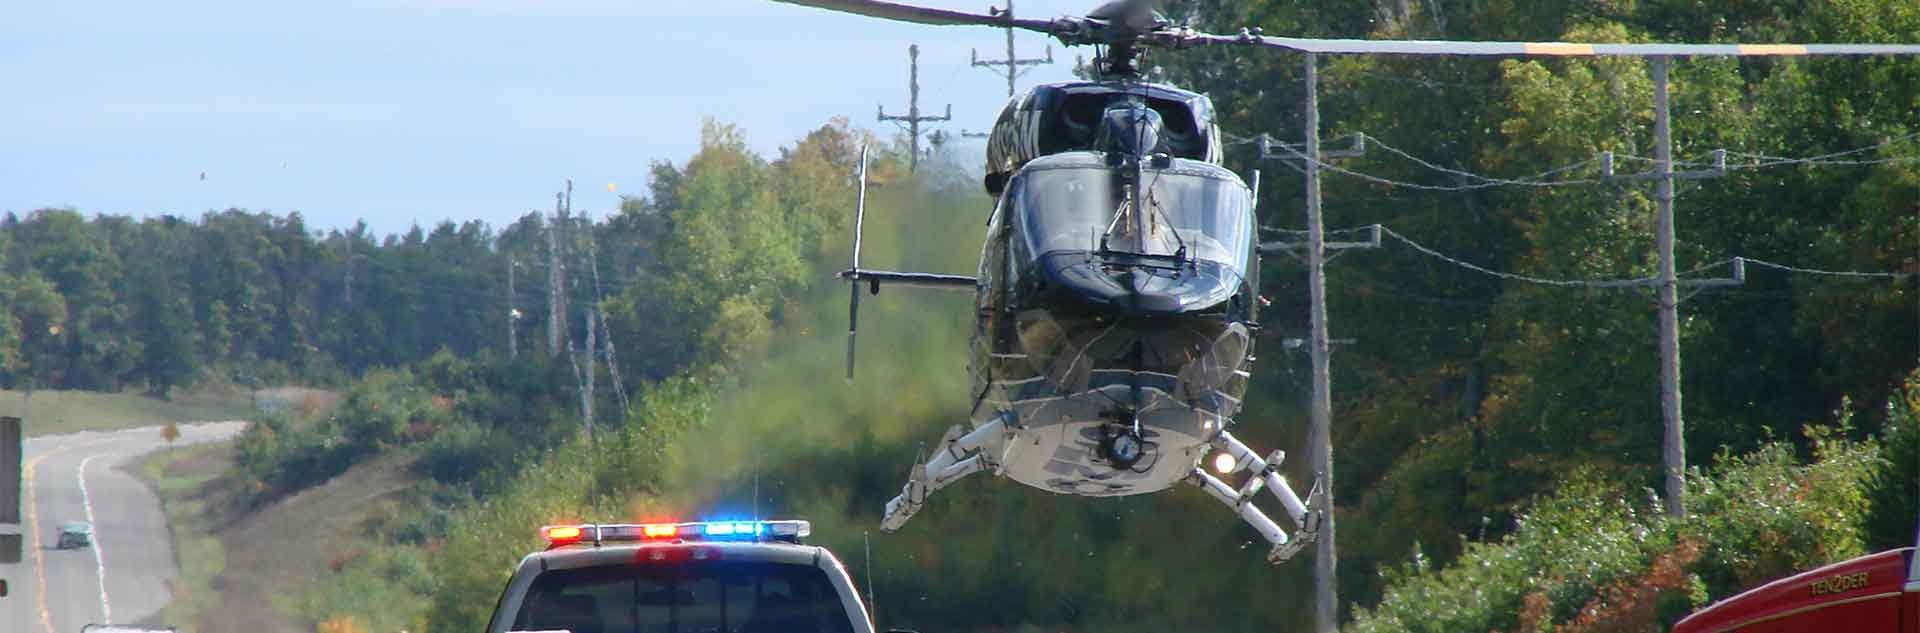 Douglas County Sheriff helicopter.